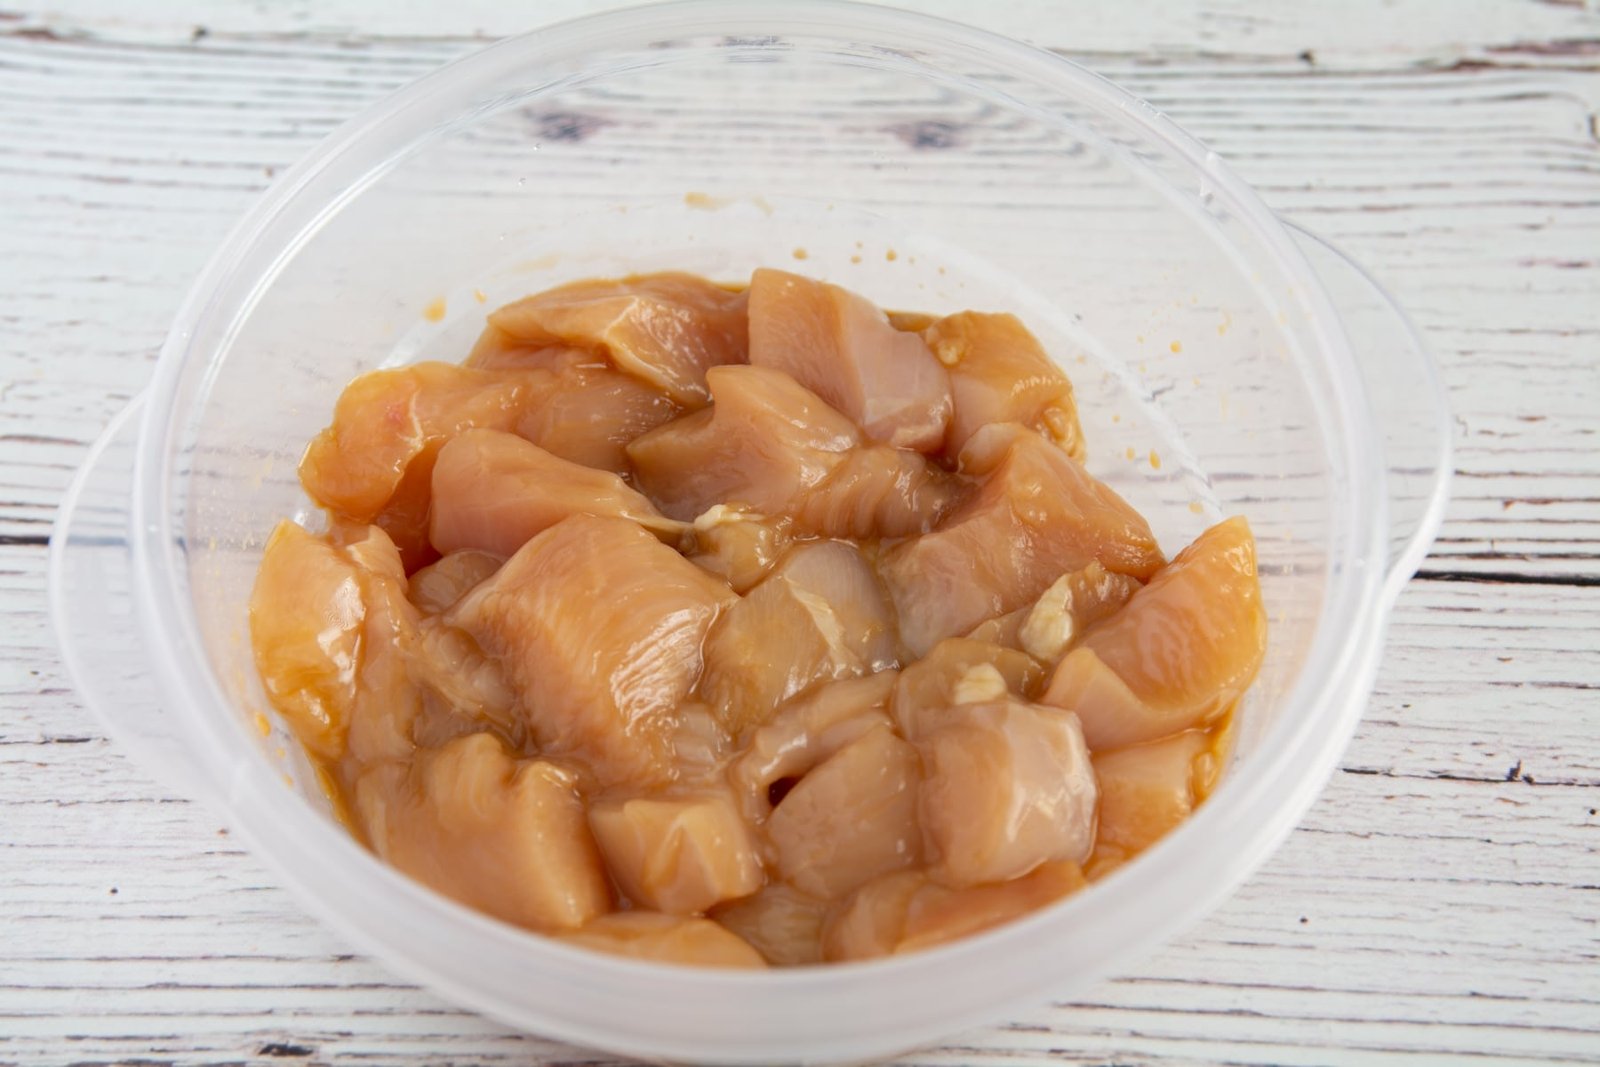 Raw chicken marinating in a bowl